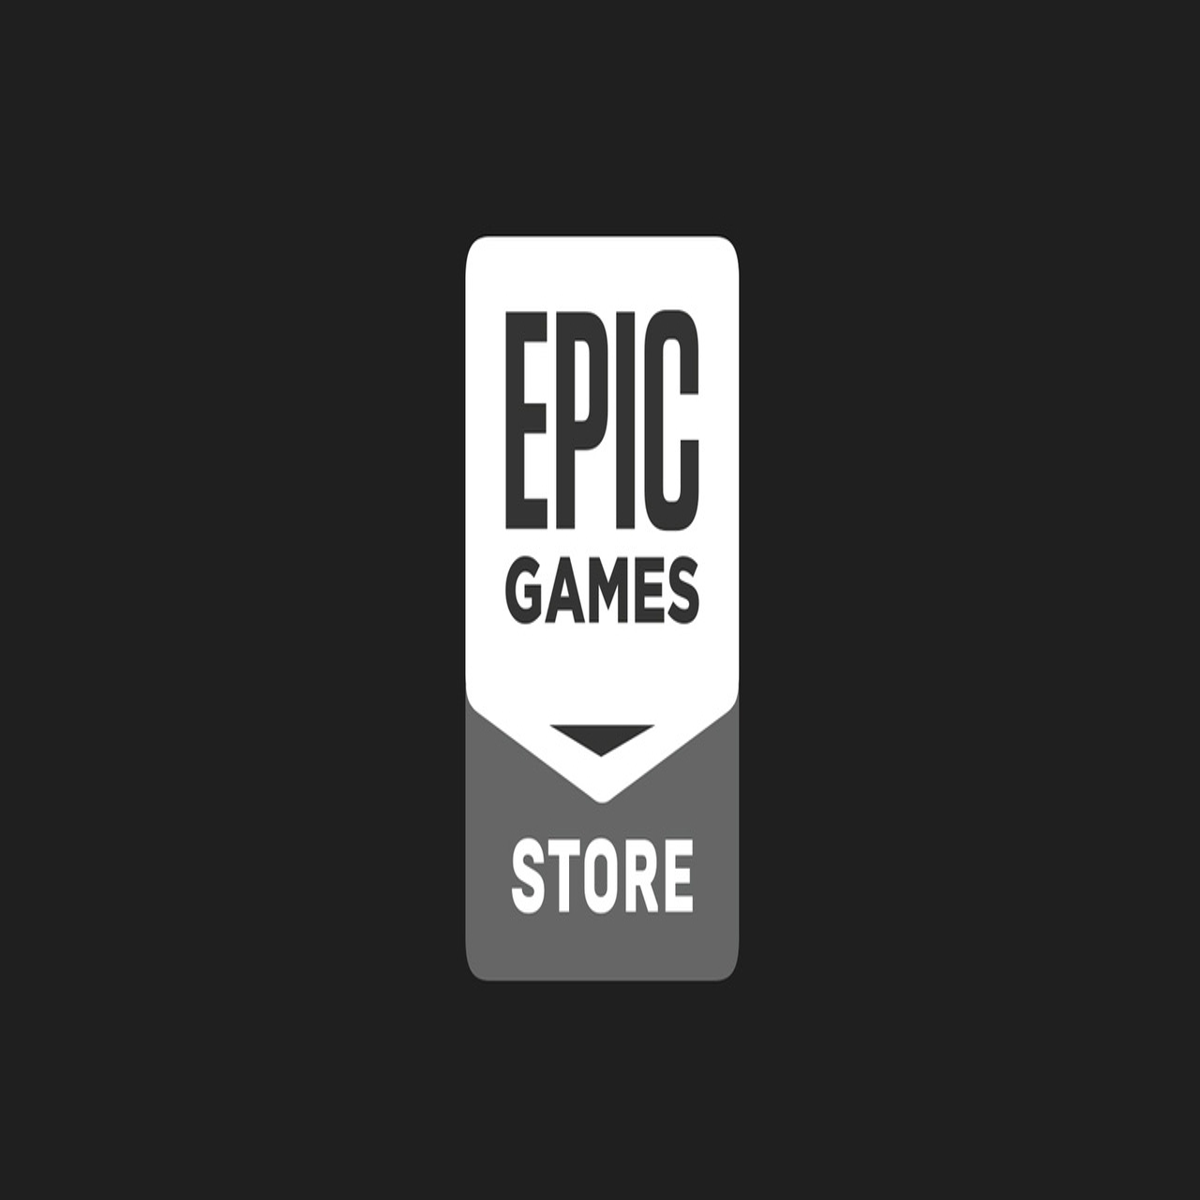 Fortnite maker Epic takes on Steam with its own PC games store